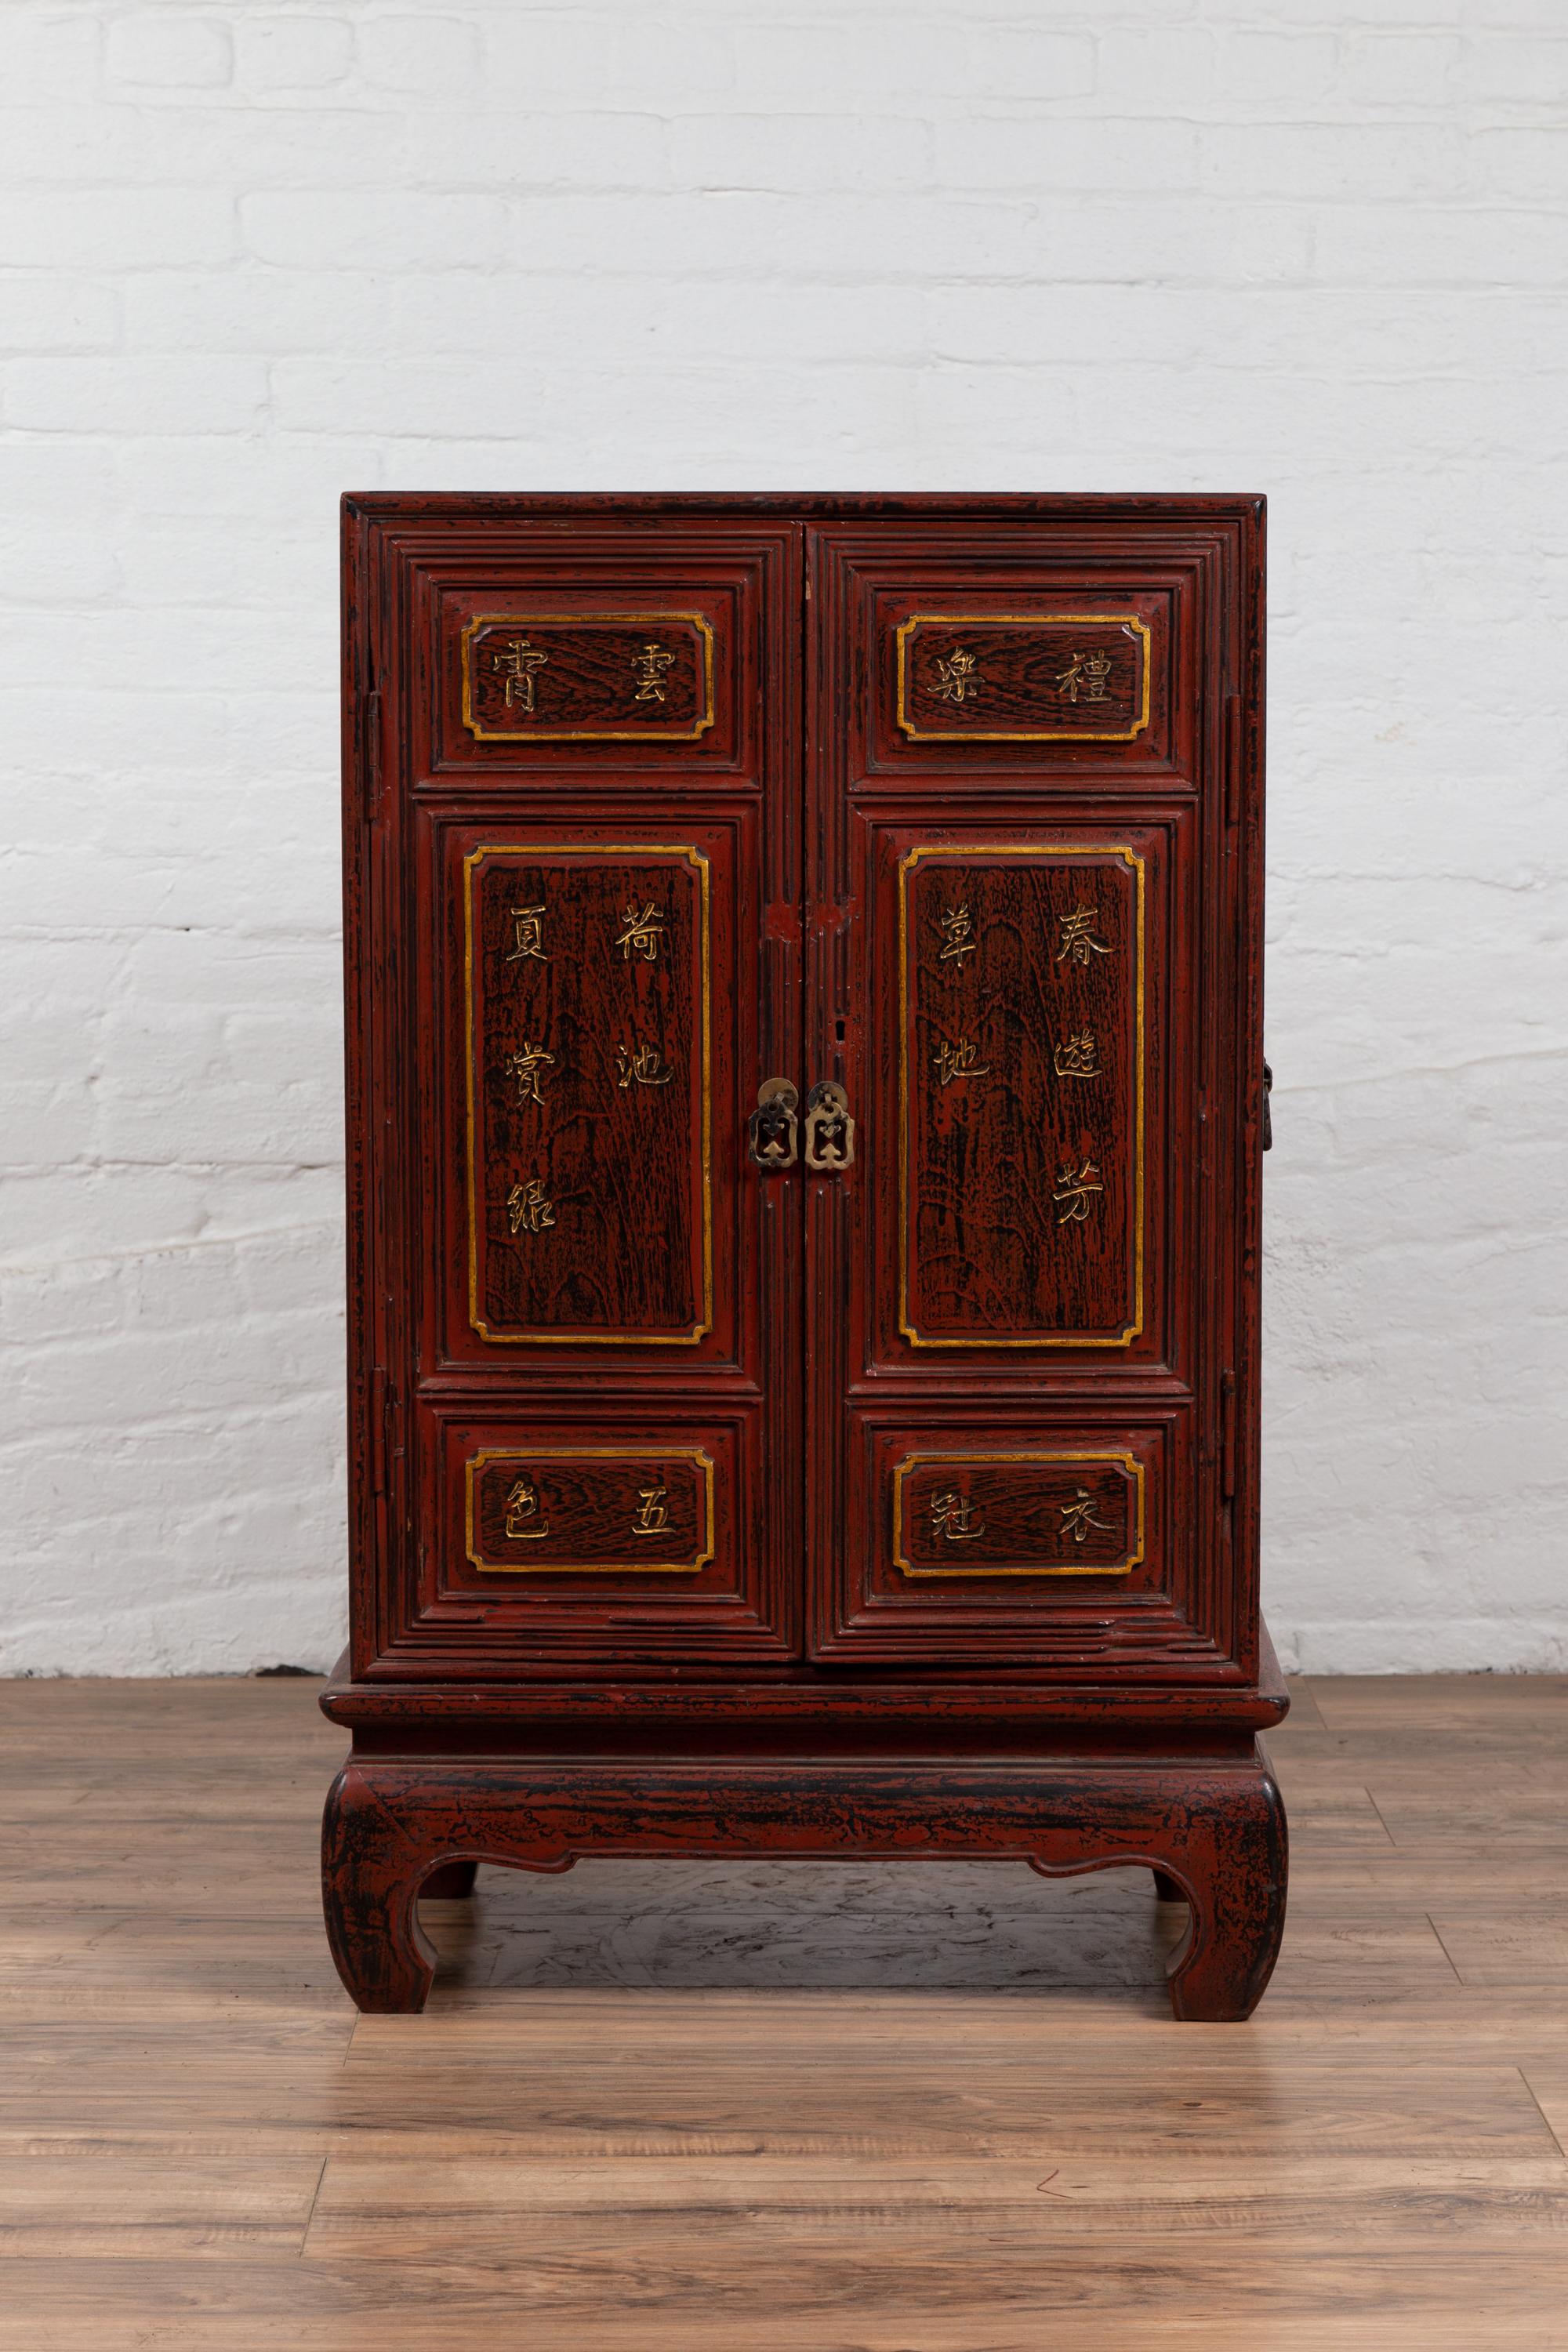 Lacquered Vintage Japanese Display Cabinet with Red Negora Lacquer and Gilded Calligraphy